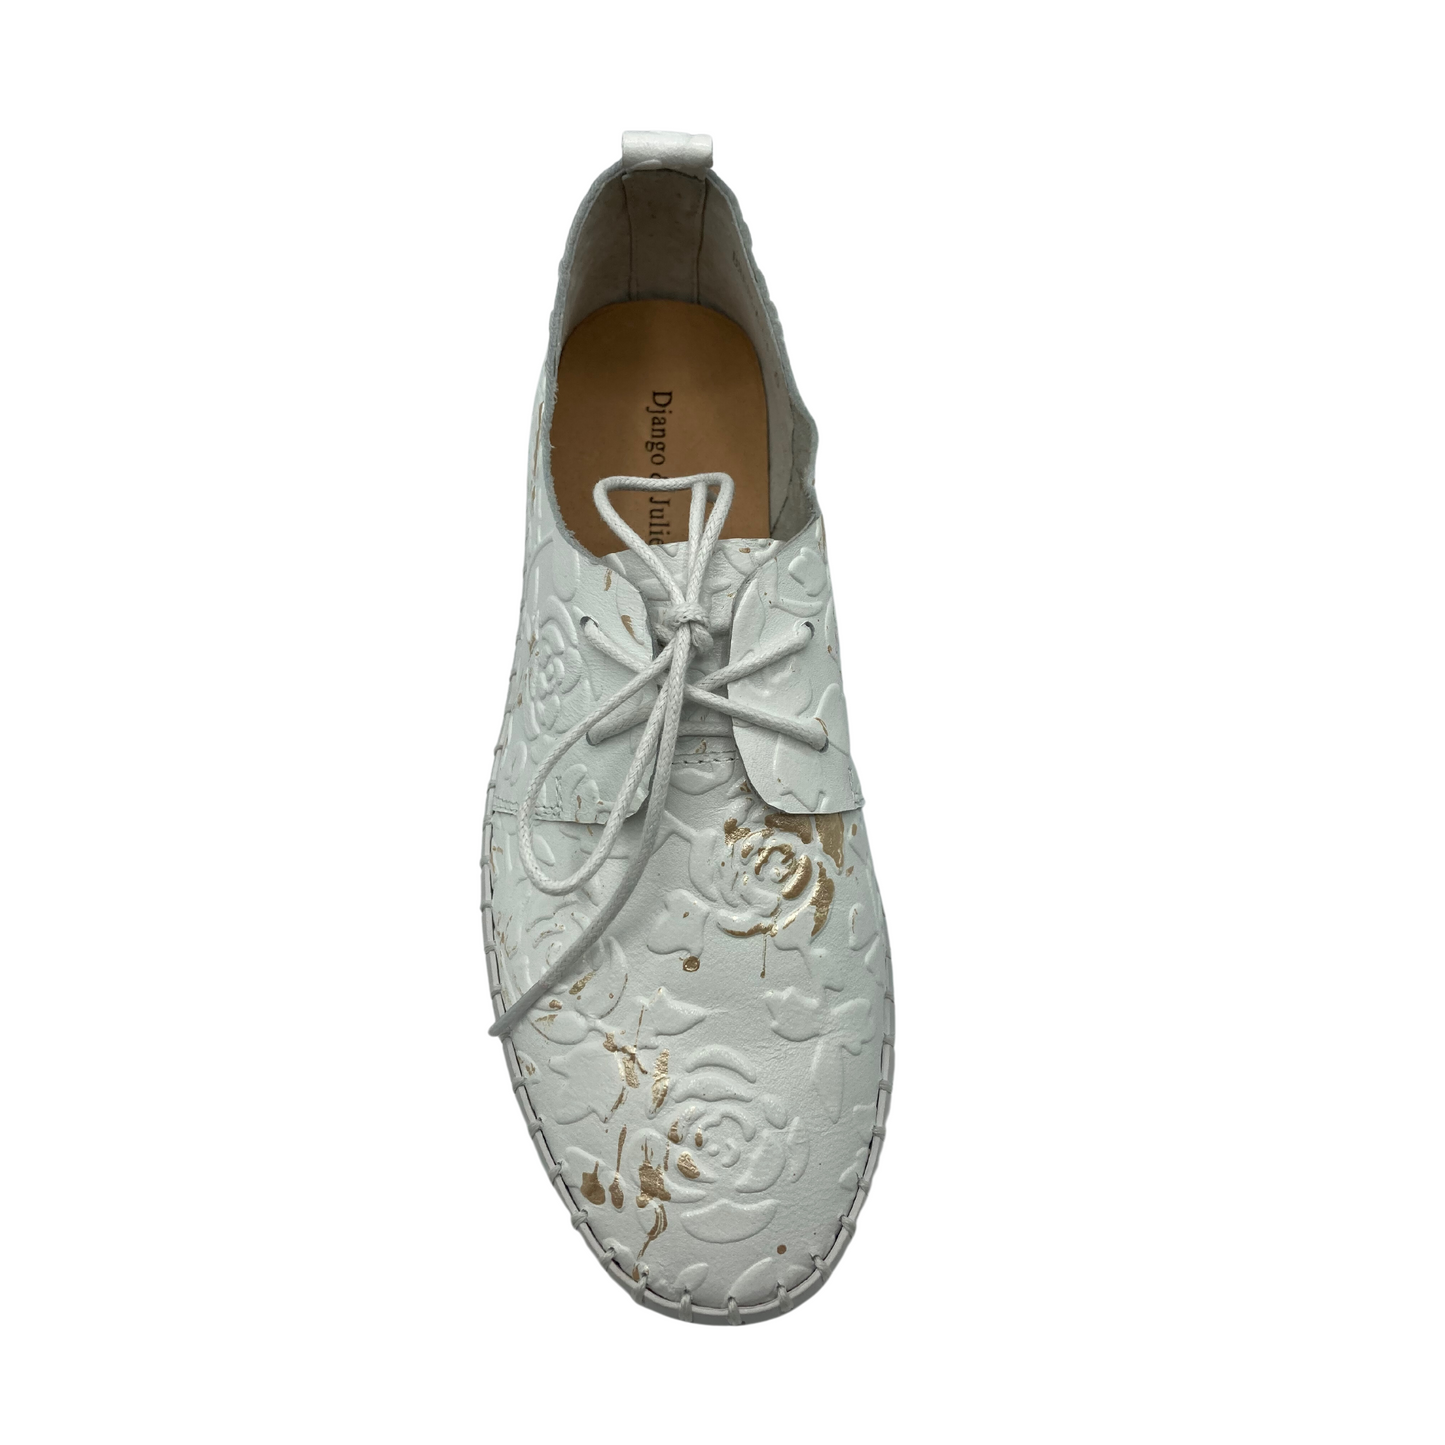 Top down view of a casual loafer that feels more like a sneaker.  Shown in white leather embossed with florals.  Laces in front